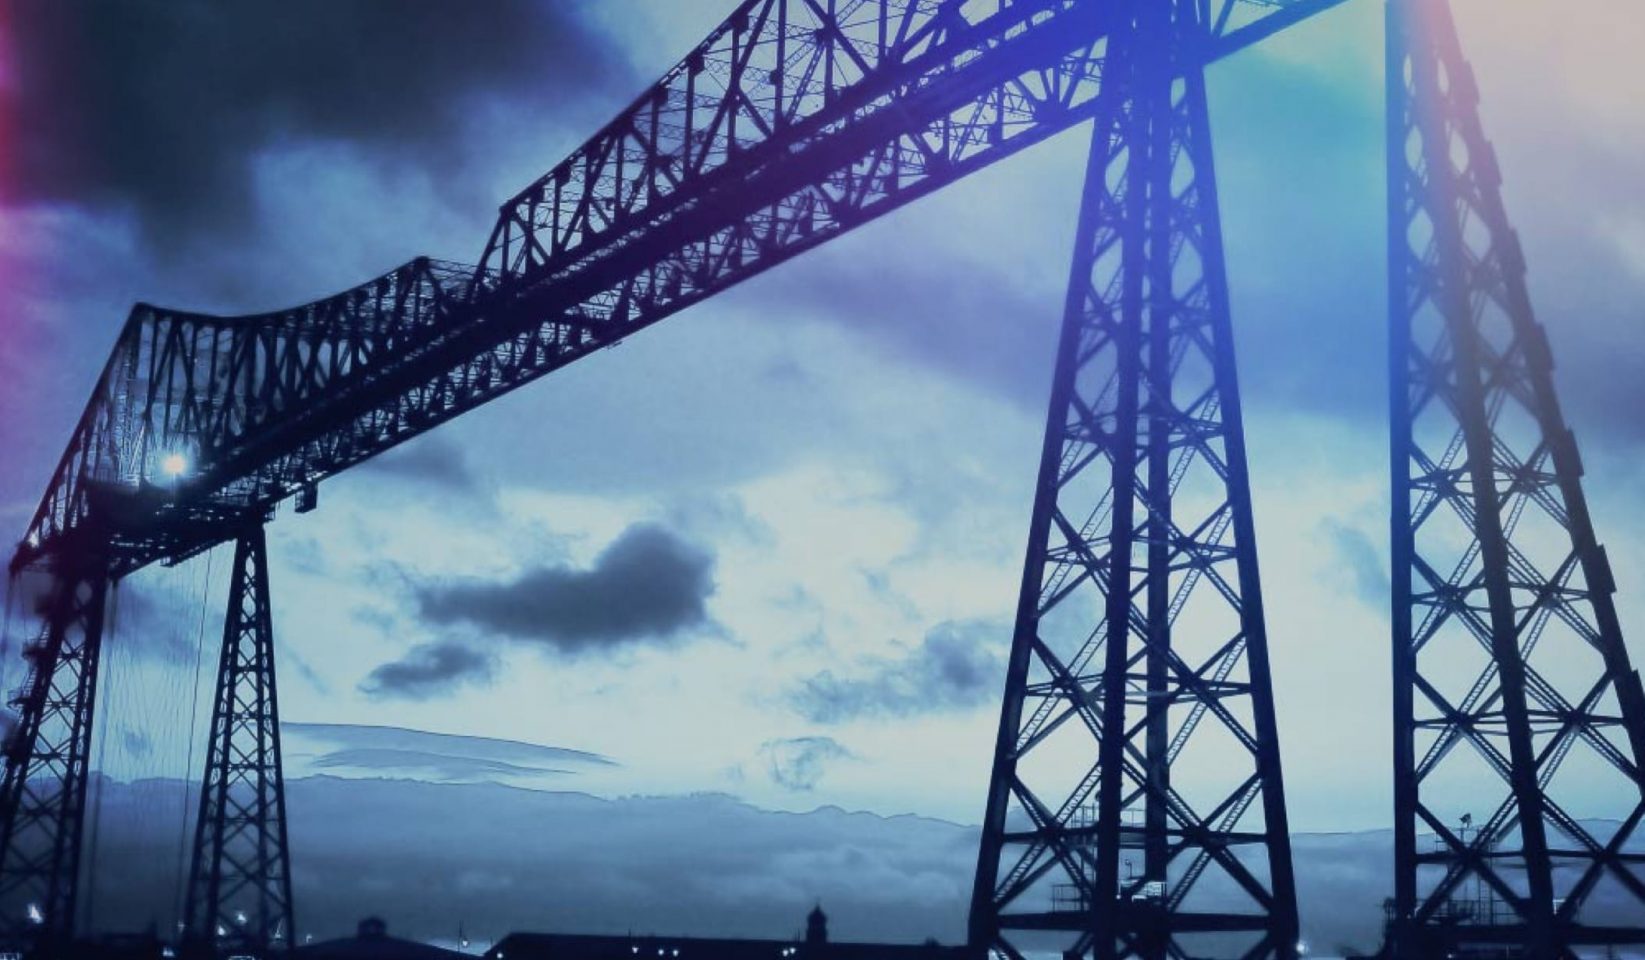 Everything you need to know about the Transporter Bridge